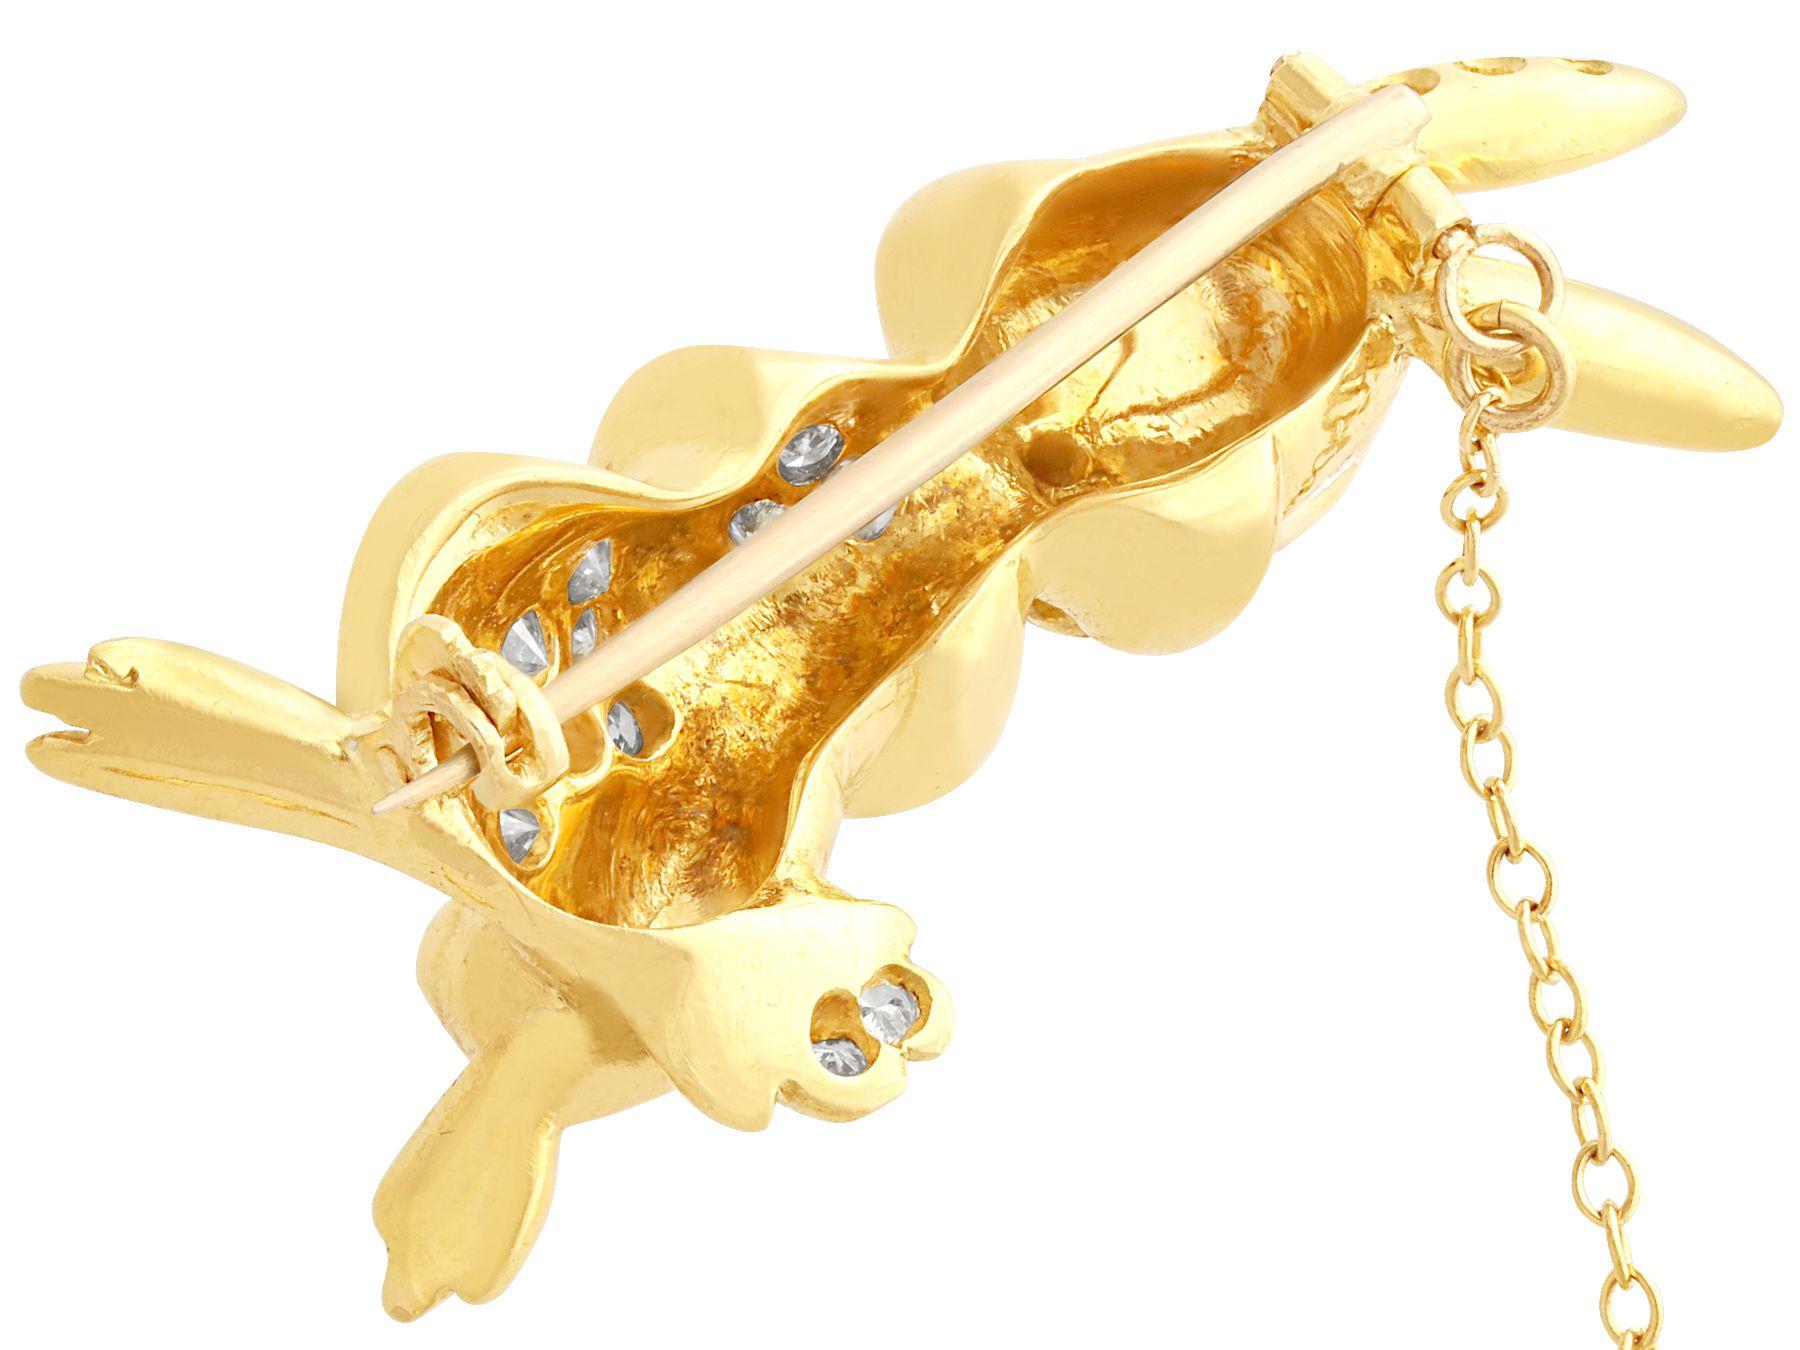 Vintage Diamond and Yellow Gold Rabbit Brooch Circa 1960 In Excellent Condition For Sale In Jesmond, Newcastle Upon Tyne